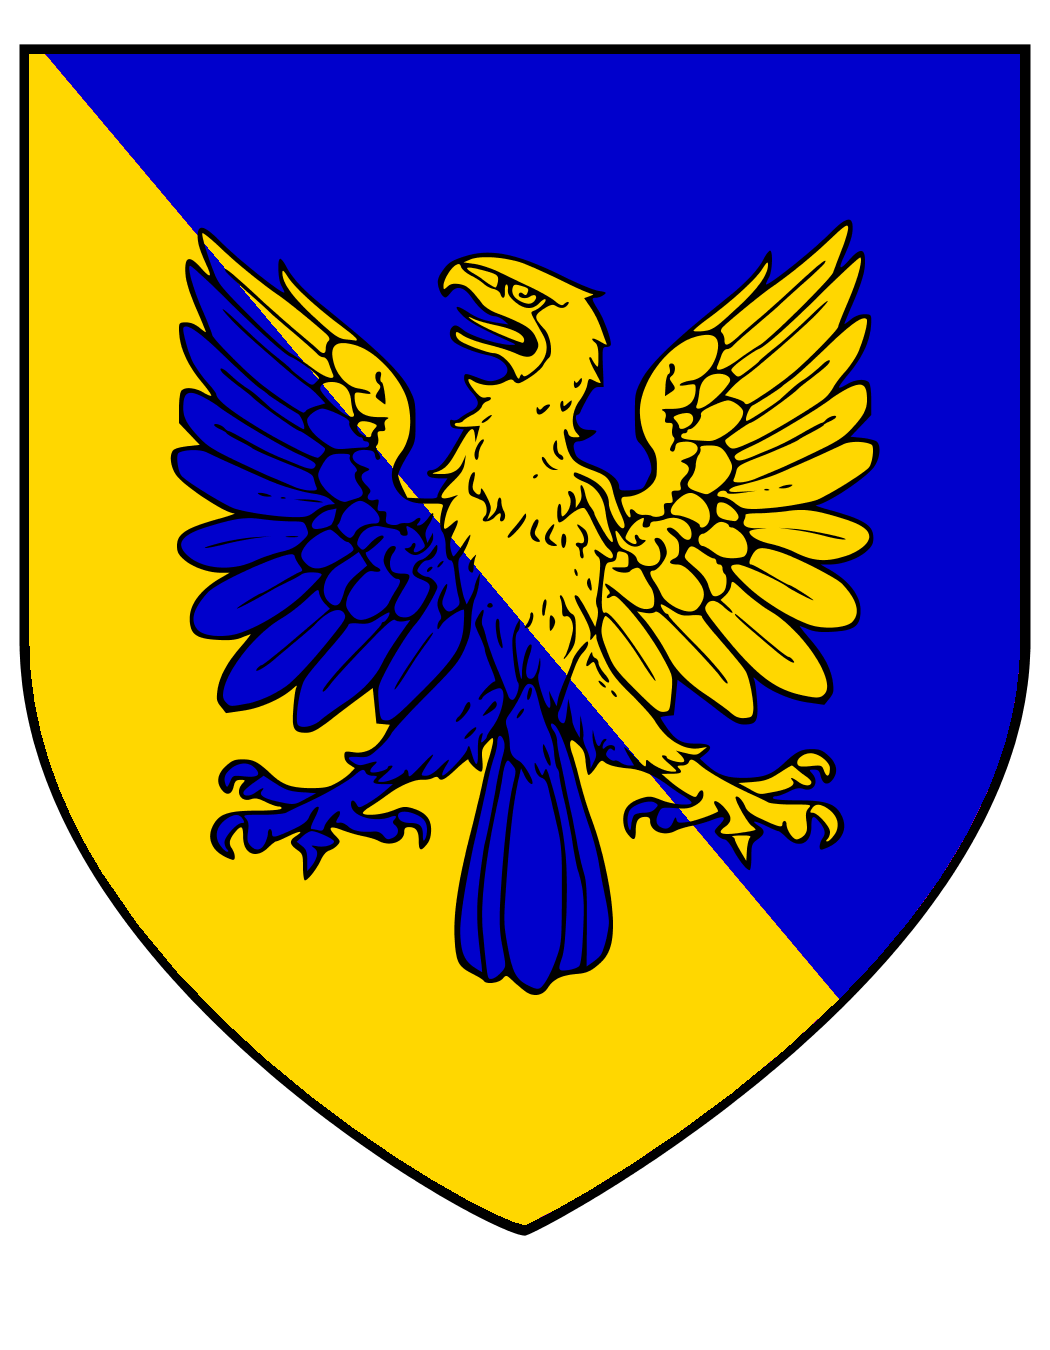 Coat Of Arms Template Maker